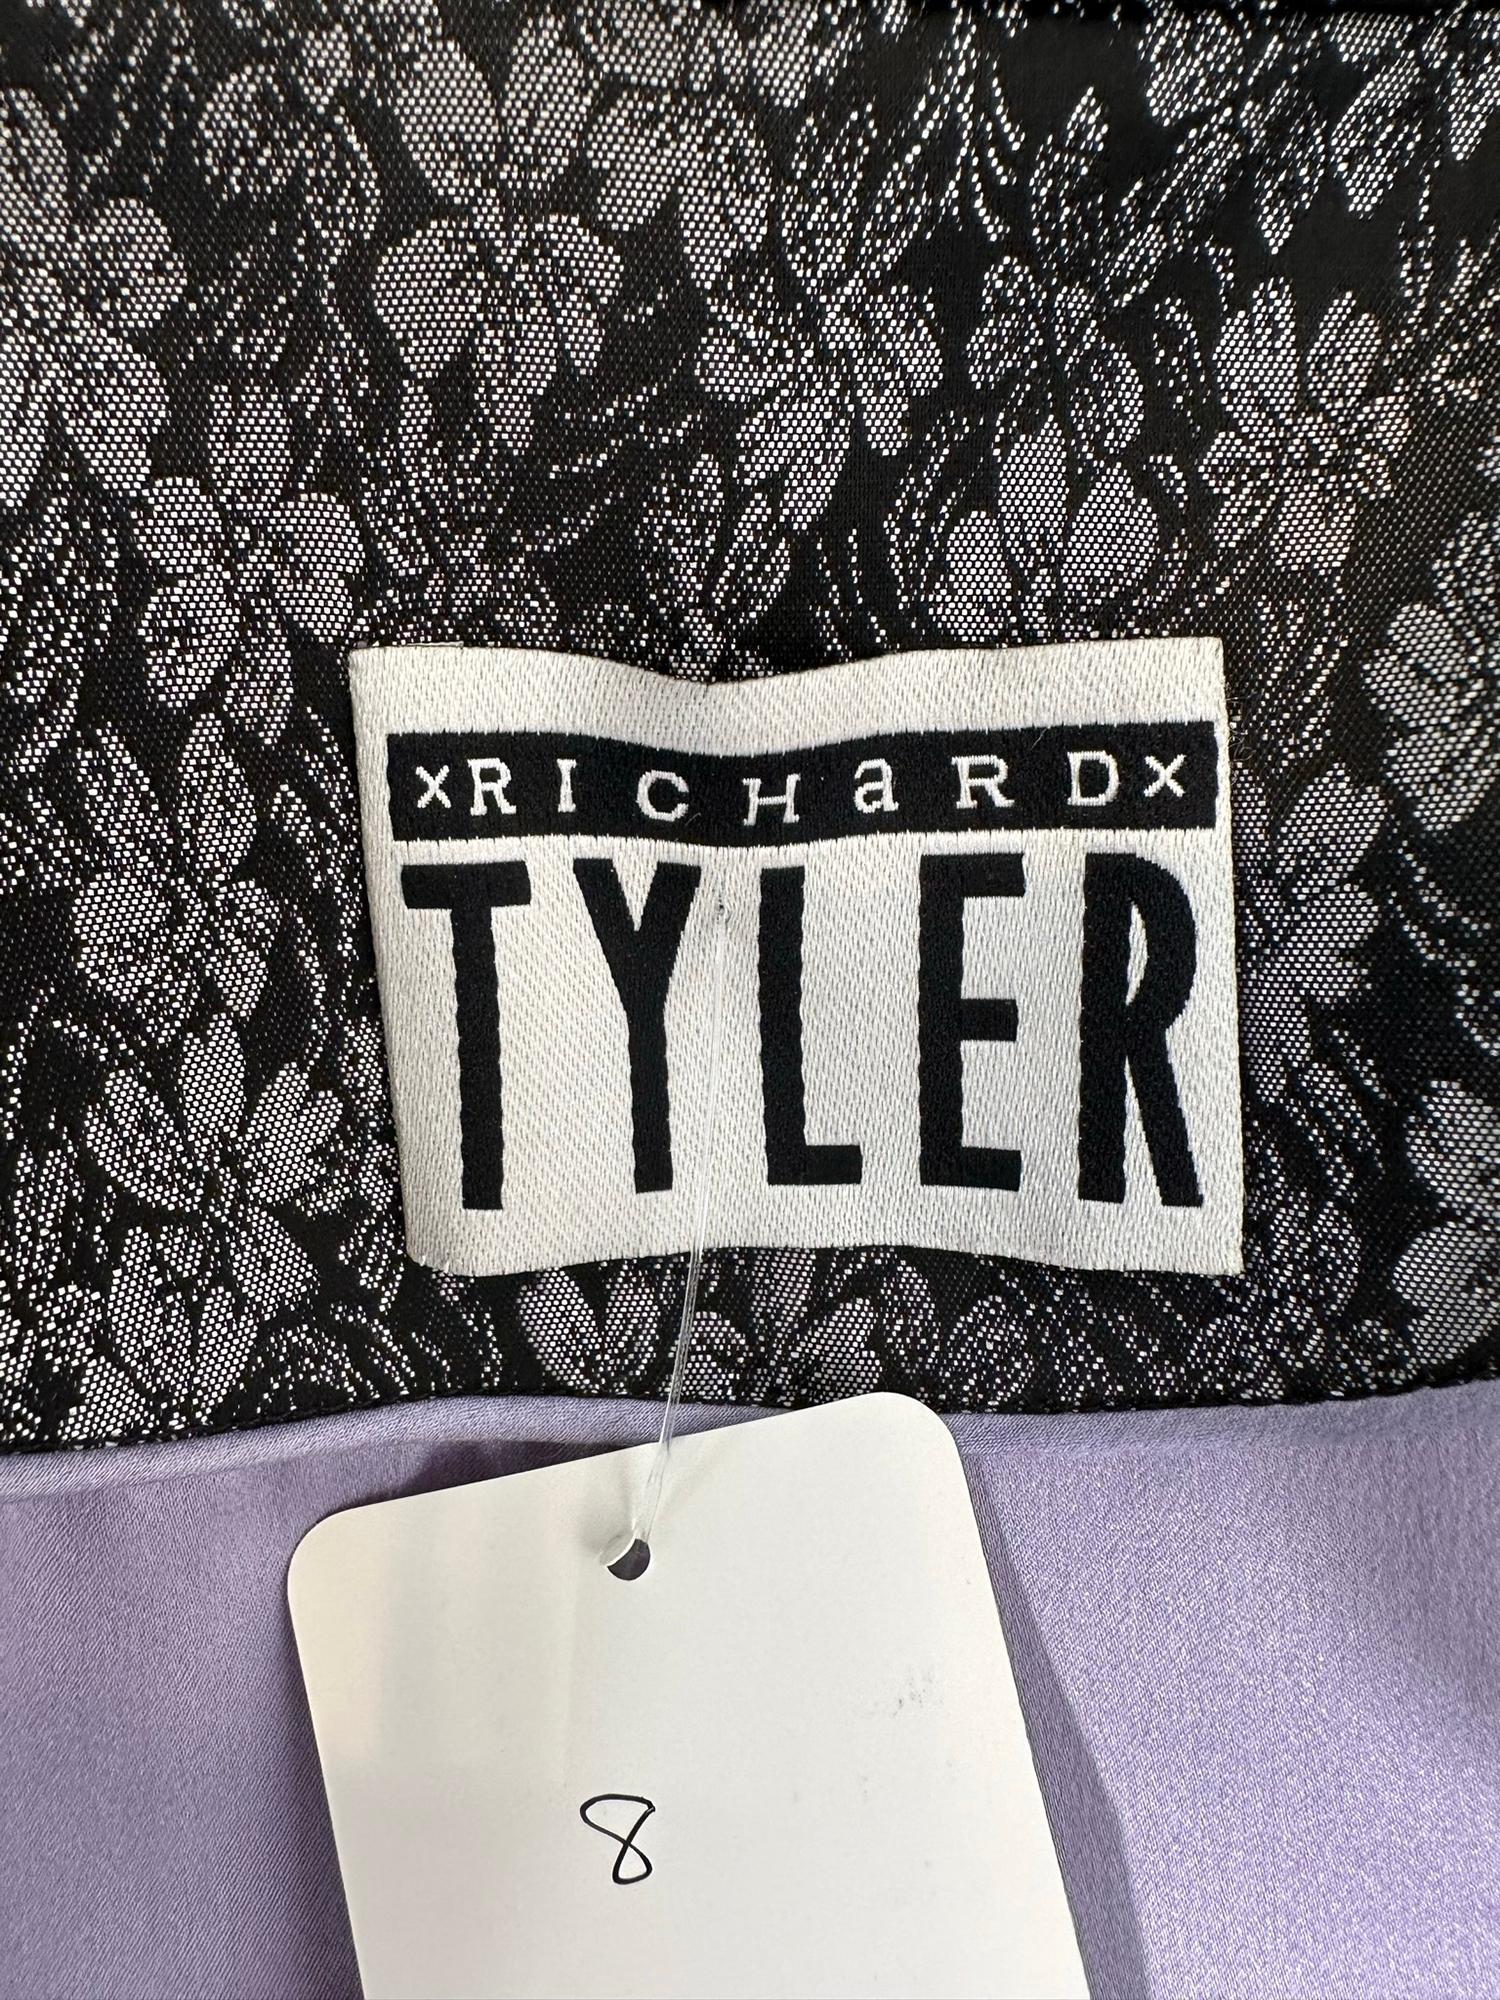 Richard Tyler Black & Silver Brocade Tailored Single Breasted Jacket 1990s For Sale 9